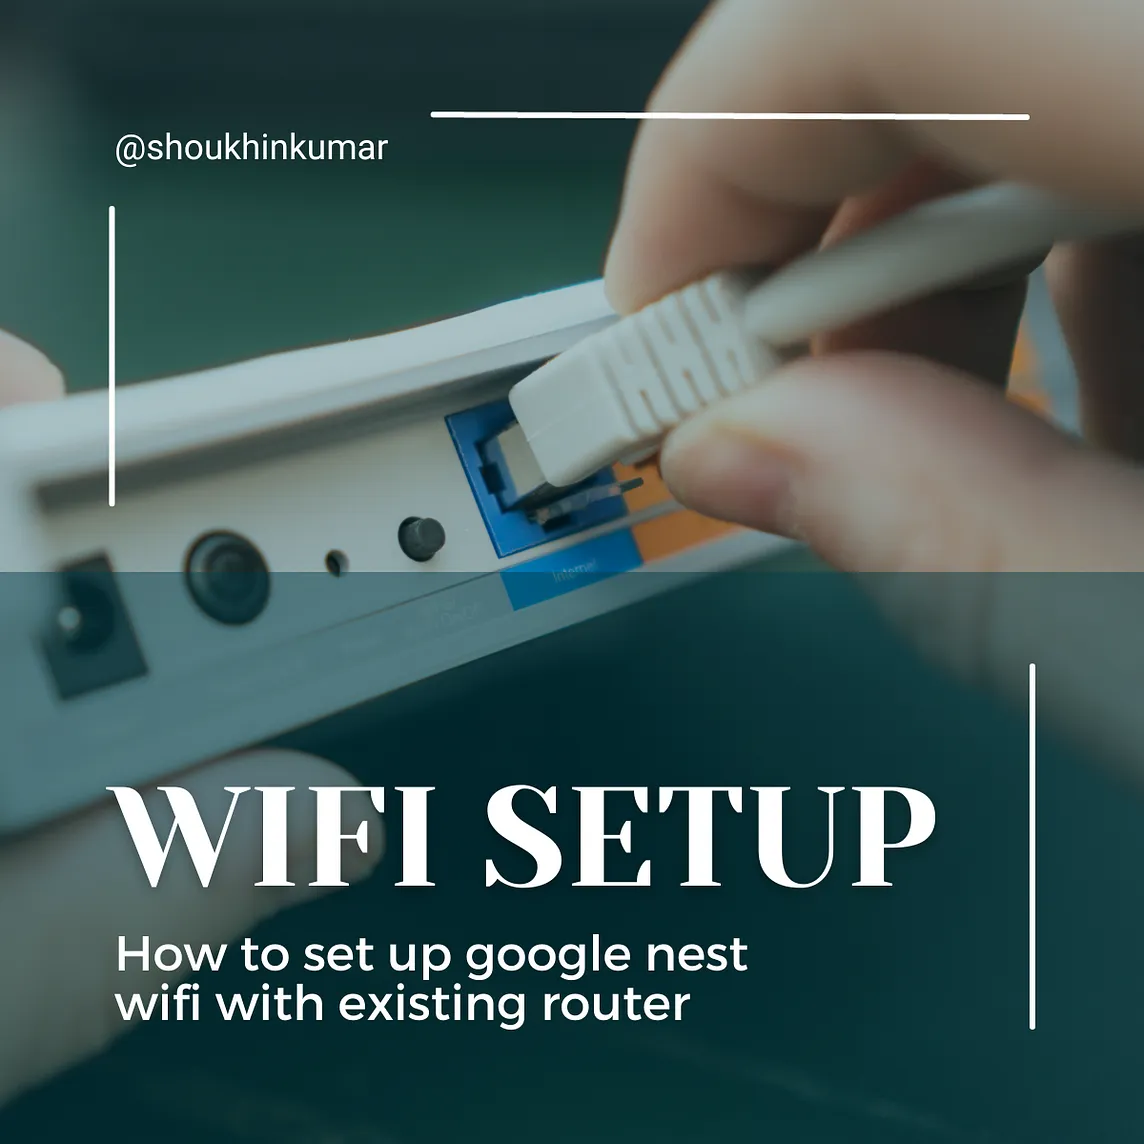 How to set up google nest wifi with an existing router